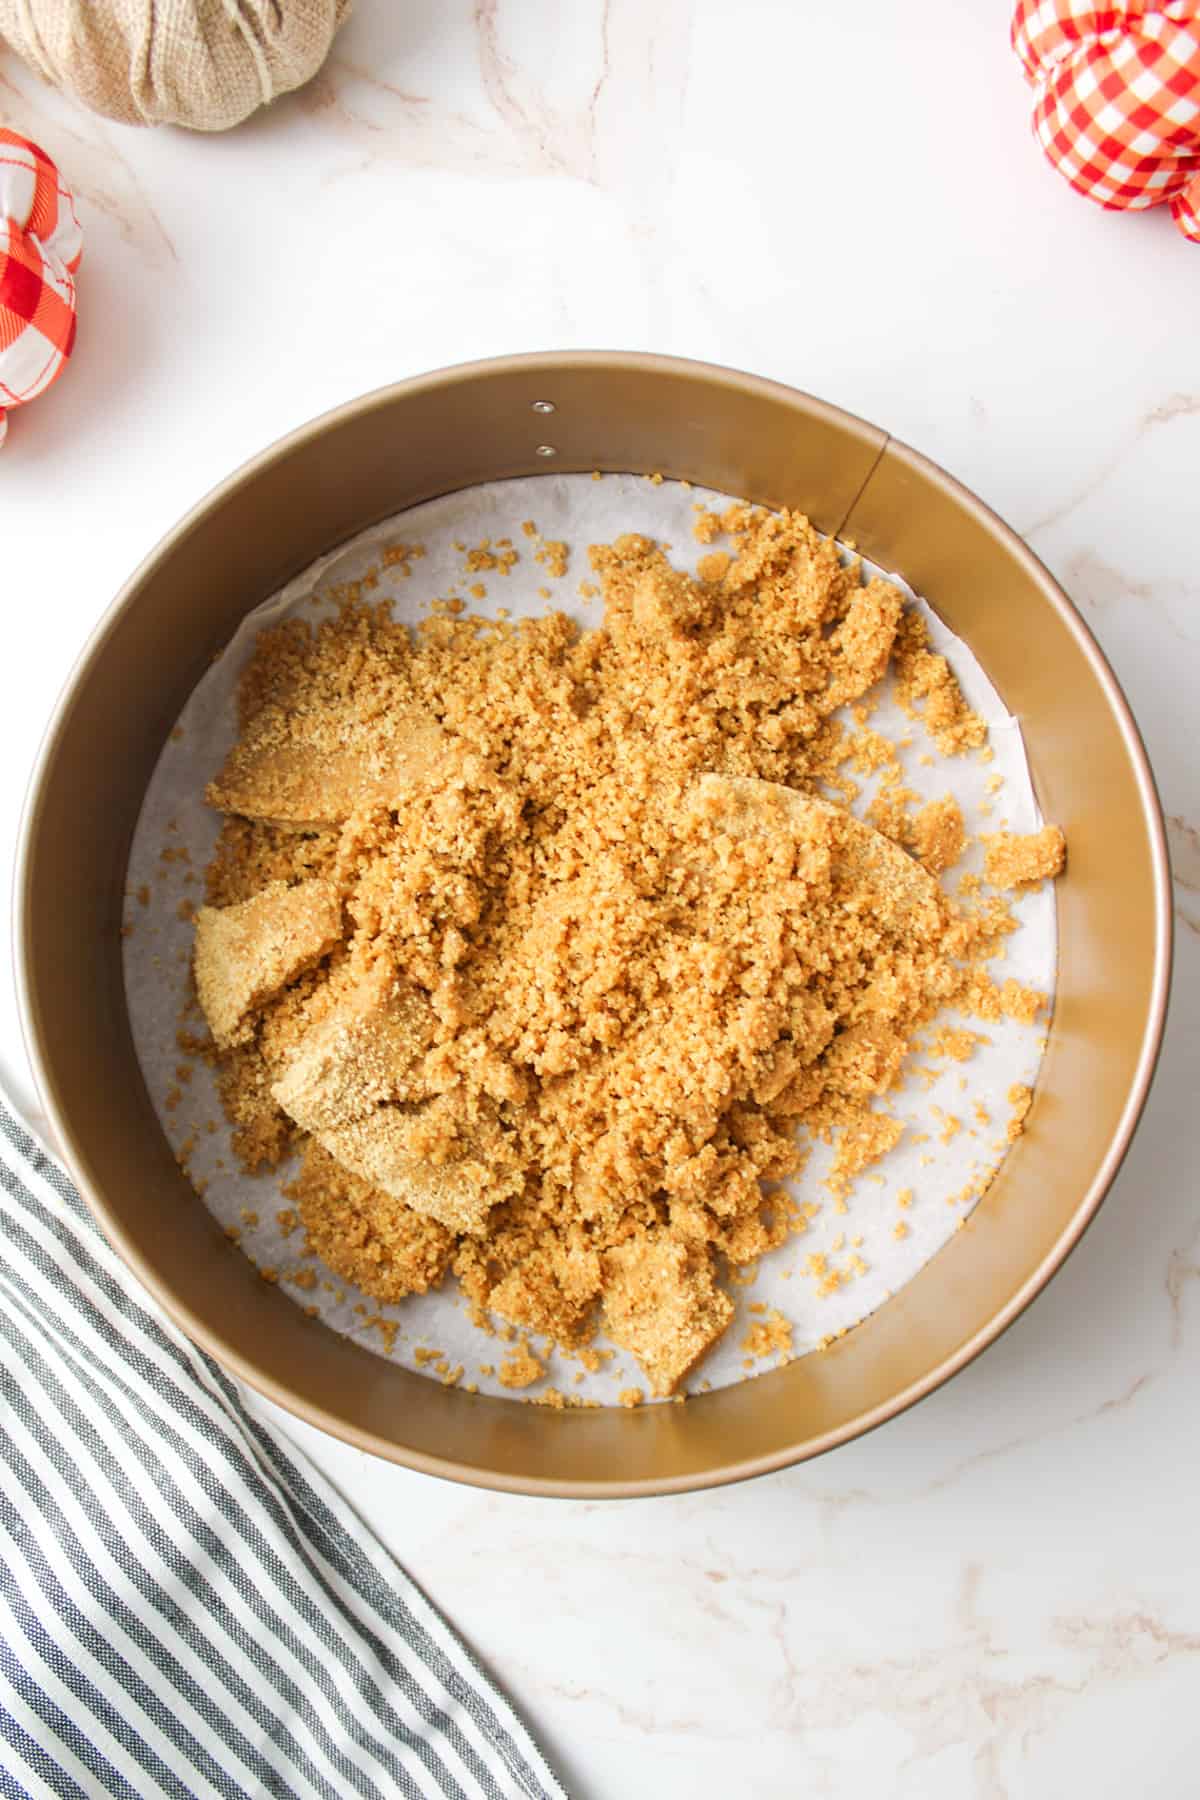 graham cracker crust mixture piled into a springform pan lined in parchment paper